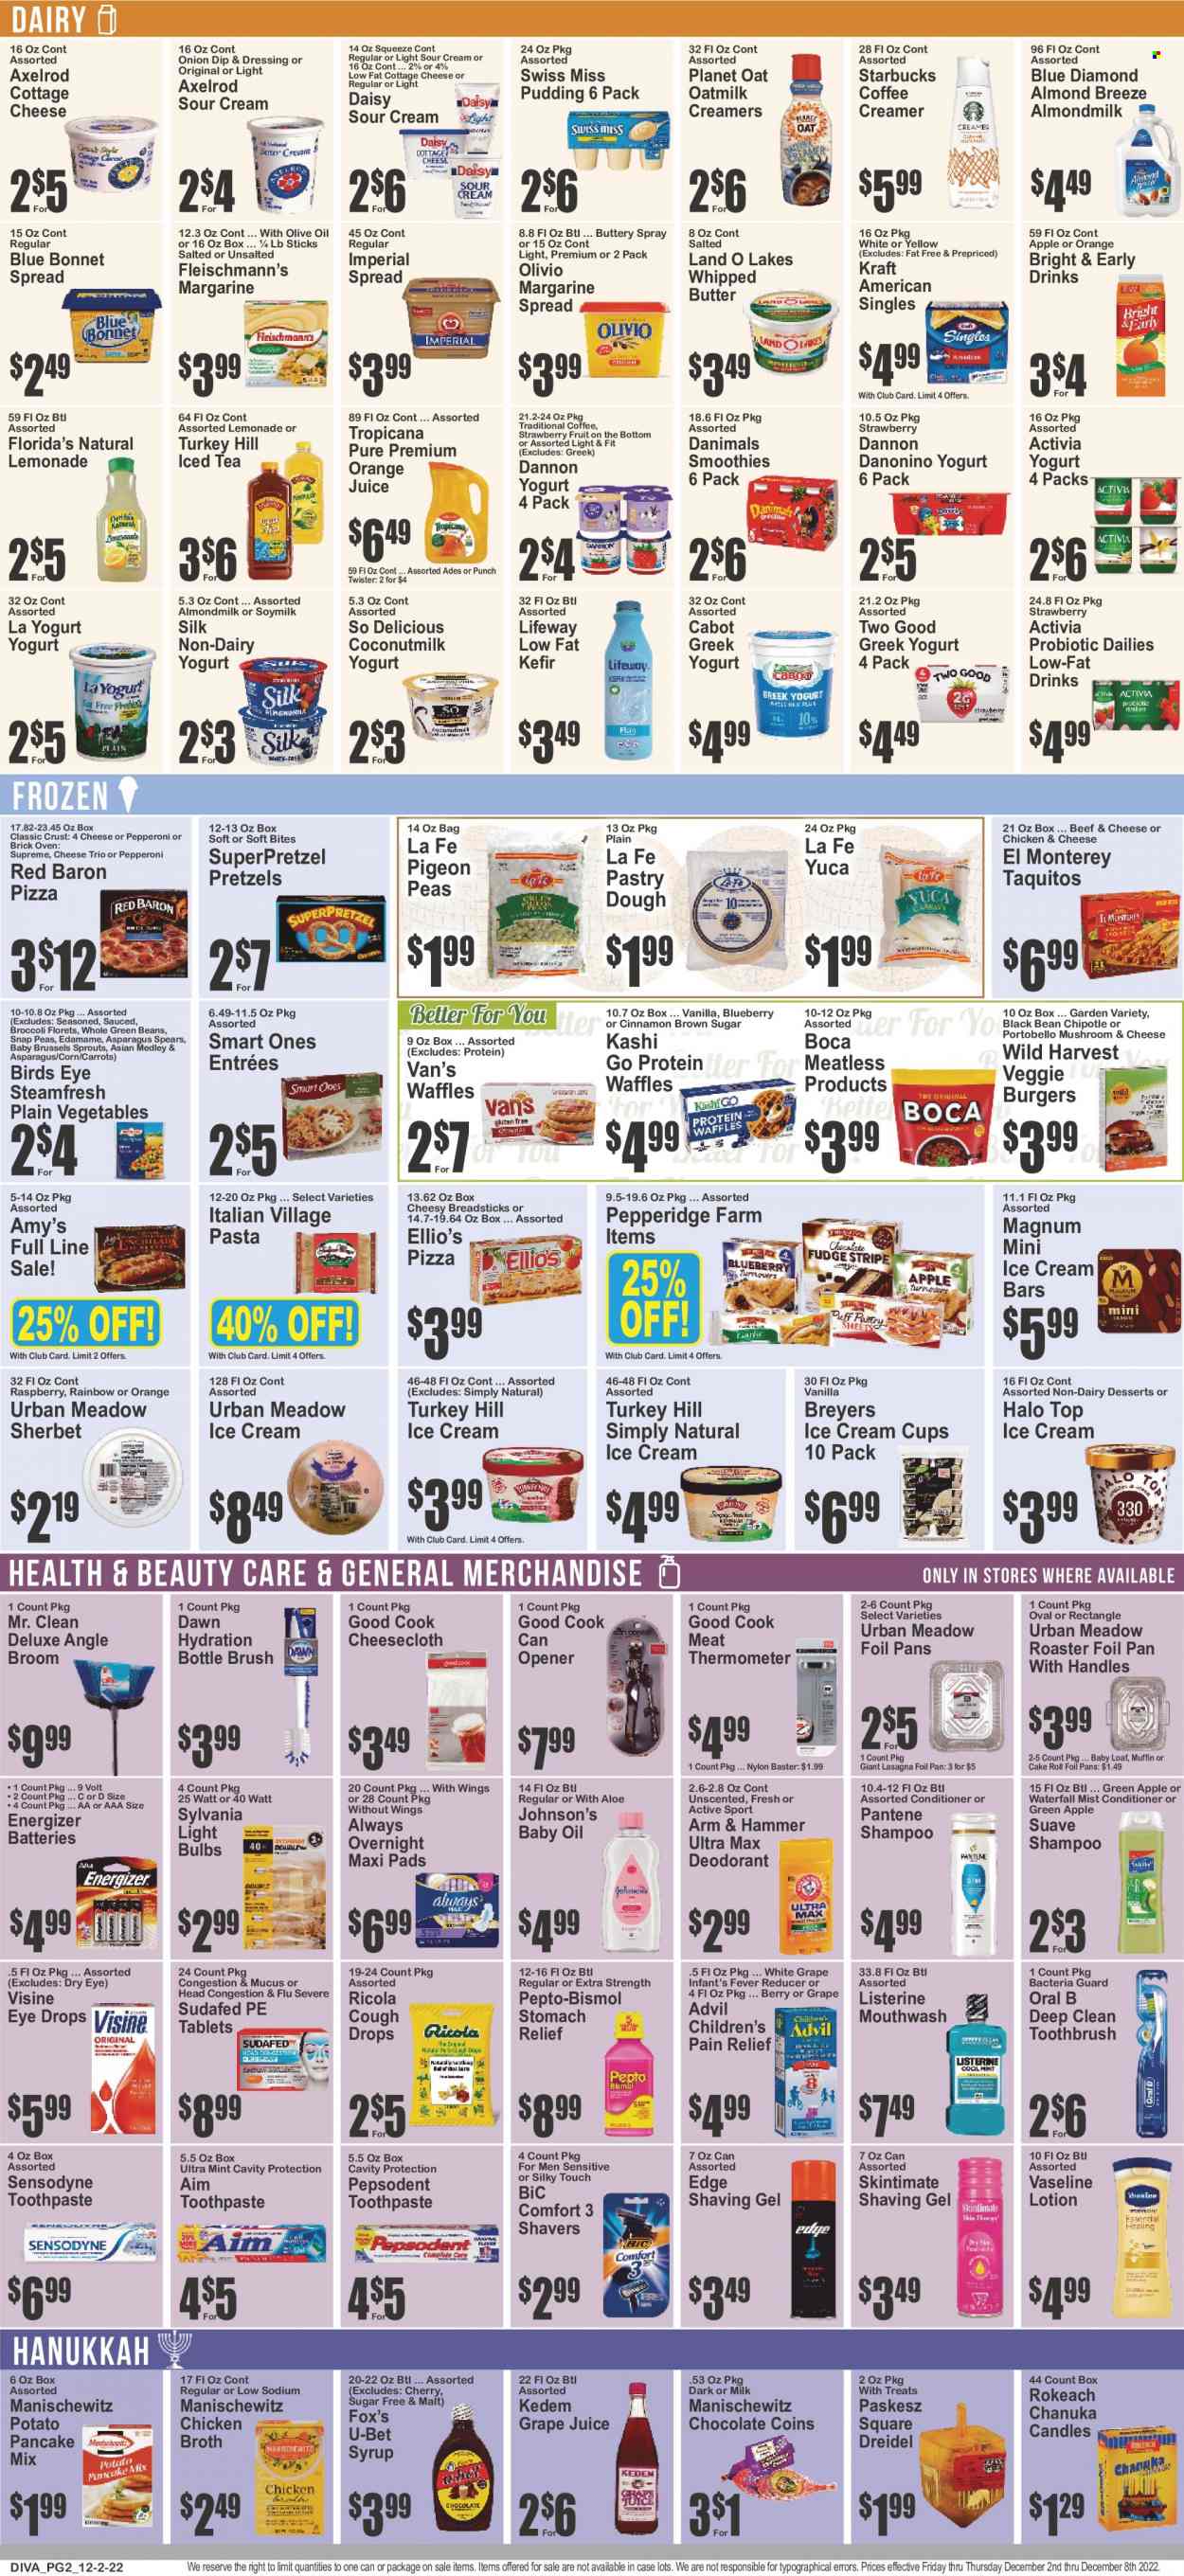 thumbnail - Brooklyn Fare Flyer - 12/02/2022 - 12/08/2022 - Sales products - portobello mushrooms, pretzels, cake, waffles, asparagus, broccoli, carrots, corn, green beans, brussel sprouts, Wild Harvest, pizza, pasta, pancakes, Bird's Eye, lasagna meal, taquitos, Kraft®, cottage cheese, Kraft Singles, greek yoghurt, pudding, Activia, Dannon, Danimals, Swiss Miss, almond milk, milk, soy milk, Silk, Almond Breeze, kefir, oat milk, margarine, whipped butter, sour cream, creamer, ice cream, ice cream bars, sherbet, snap peas, Red Baron, SuperPretzel, ricola, Florida's Natural, bread sticks, ARM & HAMMER, cane sugar, chicken broth, broth, coconut milk, toor dal, cinnamon, dressing, syrup, Blue Diamond, lemonade, orange juice, juice, ice tea, Kedem, smoothie, Starbucks, Johnson's, baby oil, shampoo, Suave, Vaseline, Listerine, toothbrush, Oral-B, toothpaste, Sensodyne, mouthwash, Pepsodent, sanitary pads, conditioner, Pantene, body lotion, anti-perspirant, deodorant, BIC, thermometer, broom, angle broom, cup, meat thermometer, Pigeon, bottle brush, candle, battery, bulb, Energizer, light bulb, Sylvania, Twister, Sudafed, pain relief, Pepto-bismol, eye drops, Advil Rapid, cough drops. Page 3.